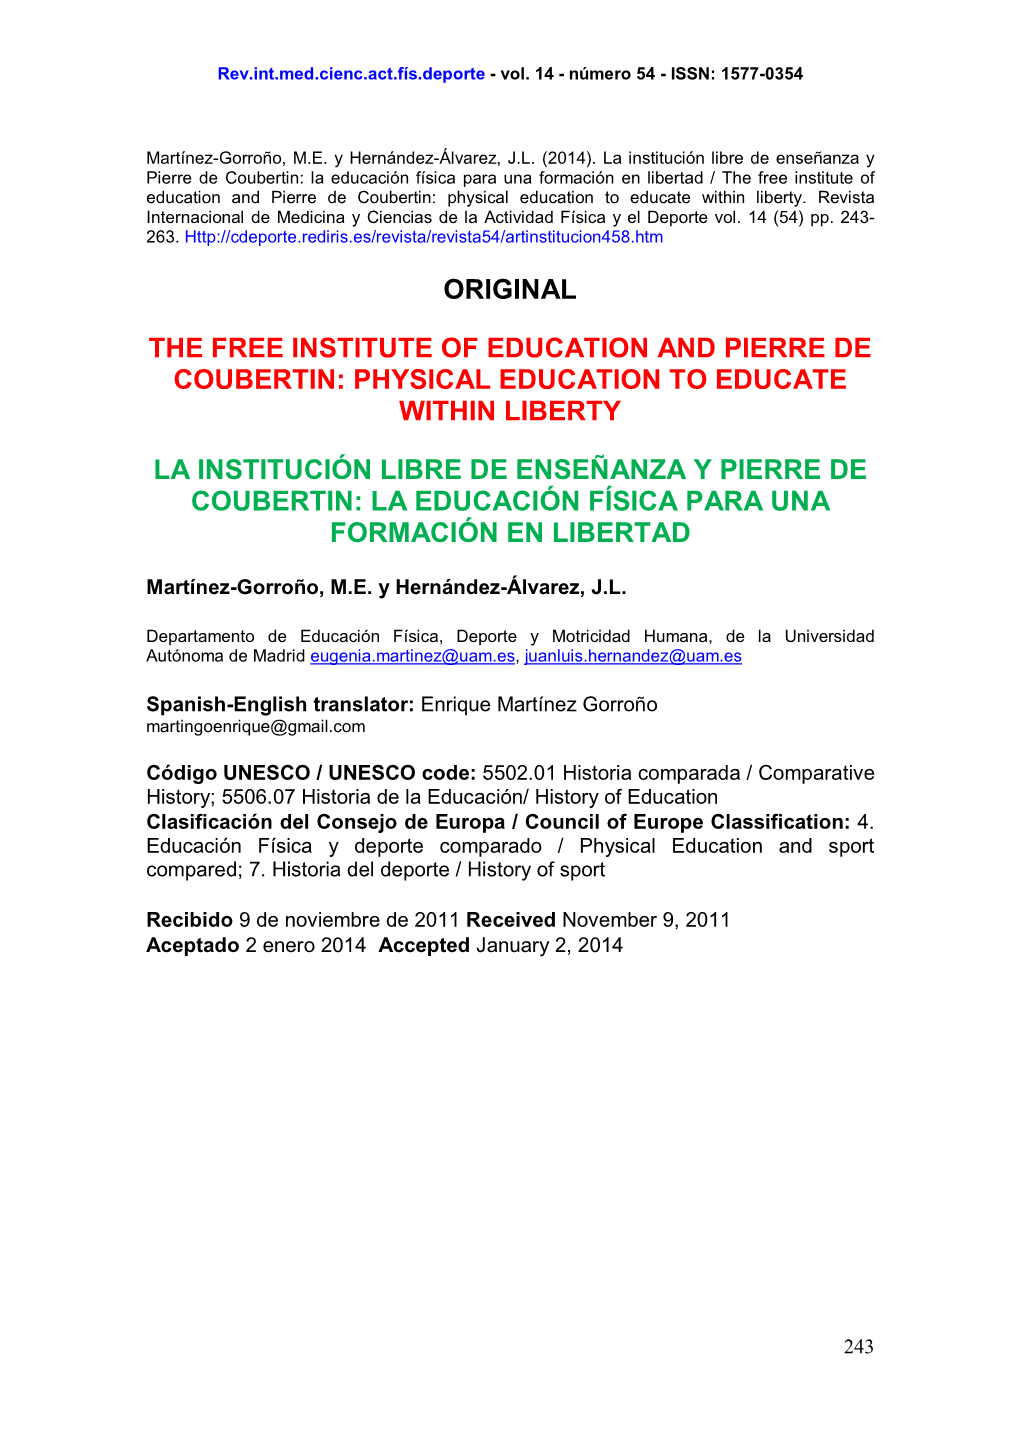 The Free Institute of Education and Pierre De Coubertin: Physical Education to Educate Within Liberty